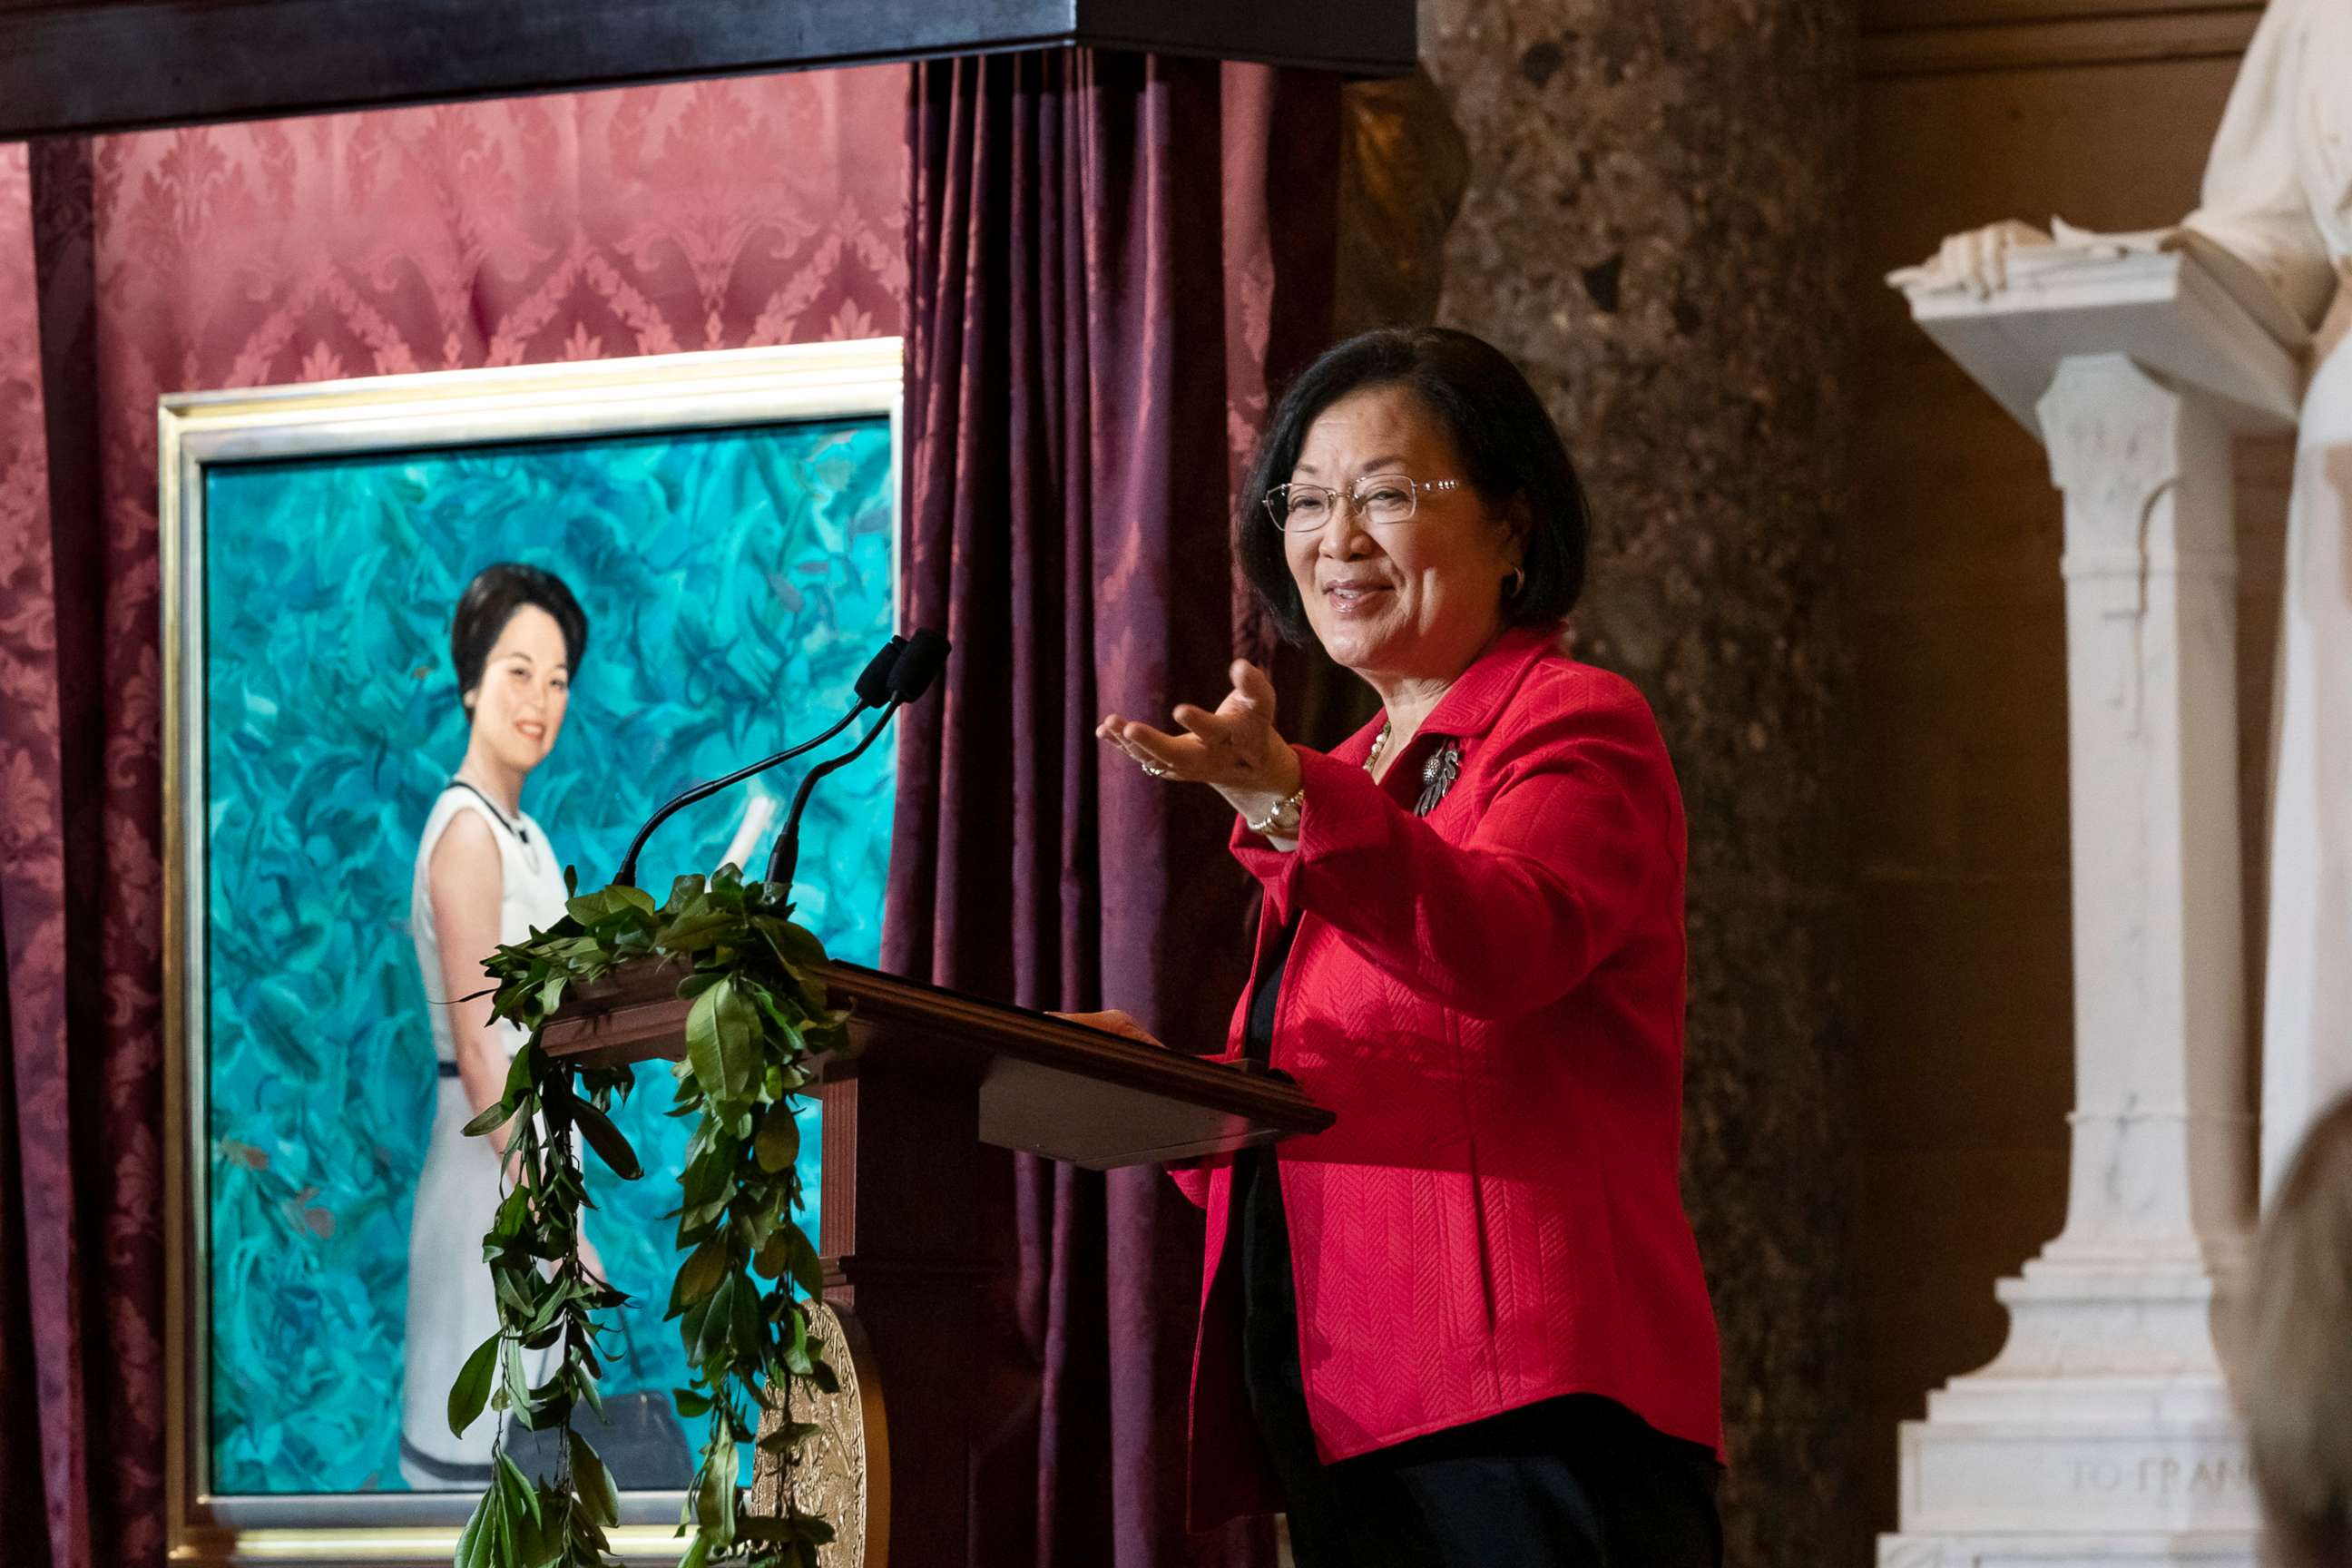 PHOTO: Sen. Mazie Hirono of Hawaii, speaks after helping to unveil a portrait of the late Rep. Patsy Mink of Hawaii, the first Asian-American woman elected to Congress, who helped pass the Title IX Amendment, at the U.S. Capitol, June 23, 2022.